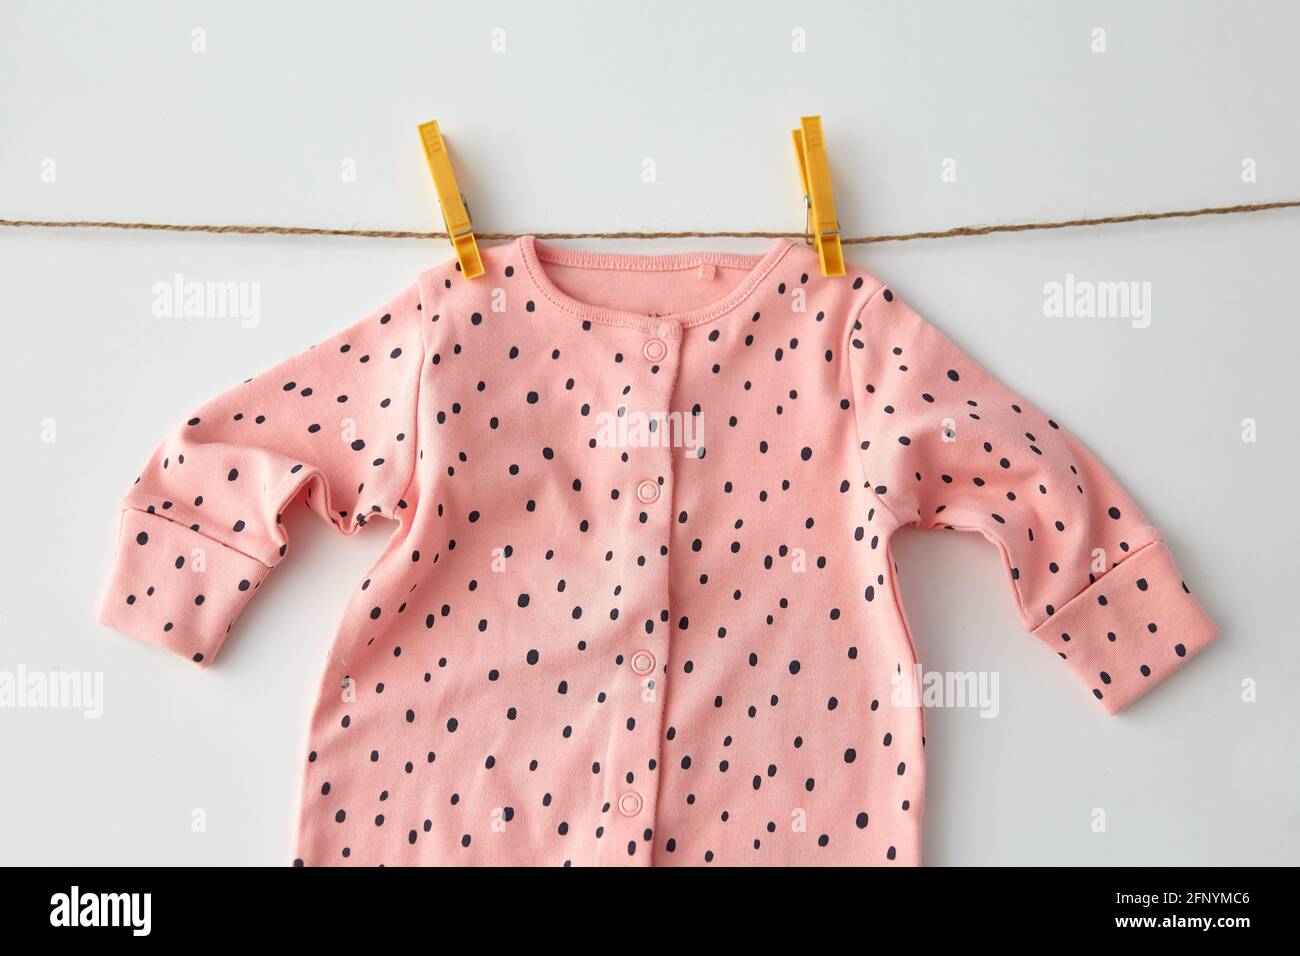 bodysuit for baby girl hanging on rope with pins Stock Photo